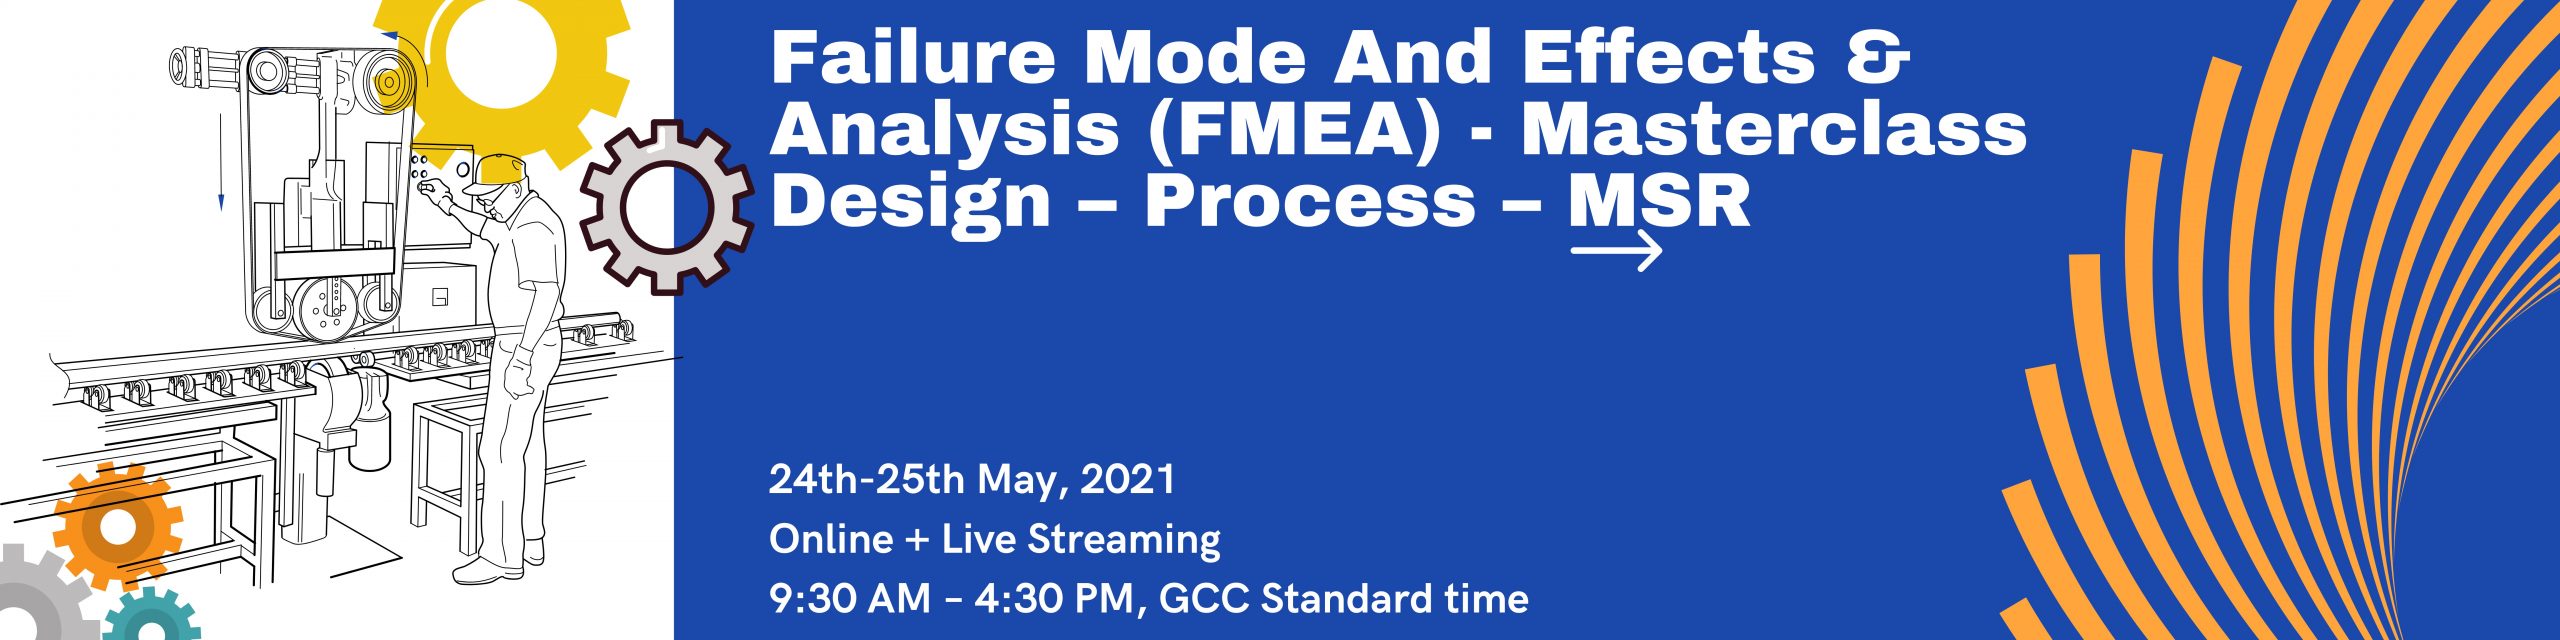 Failure Mode and Effects & Analysis (FMEA) Design – Process – MSR